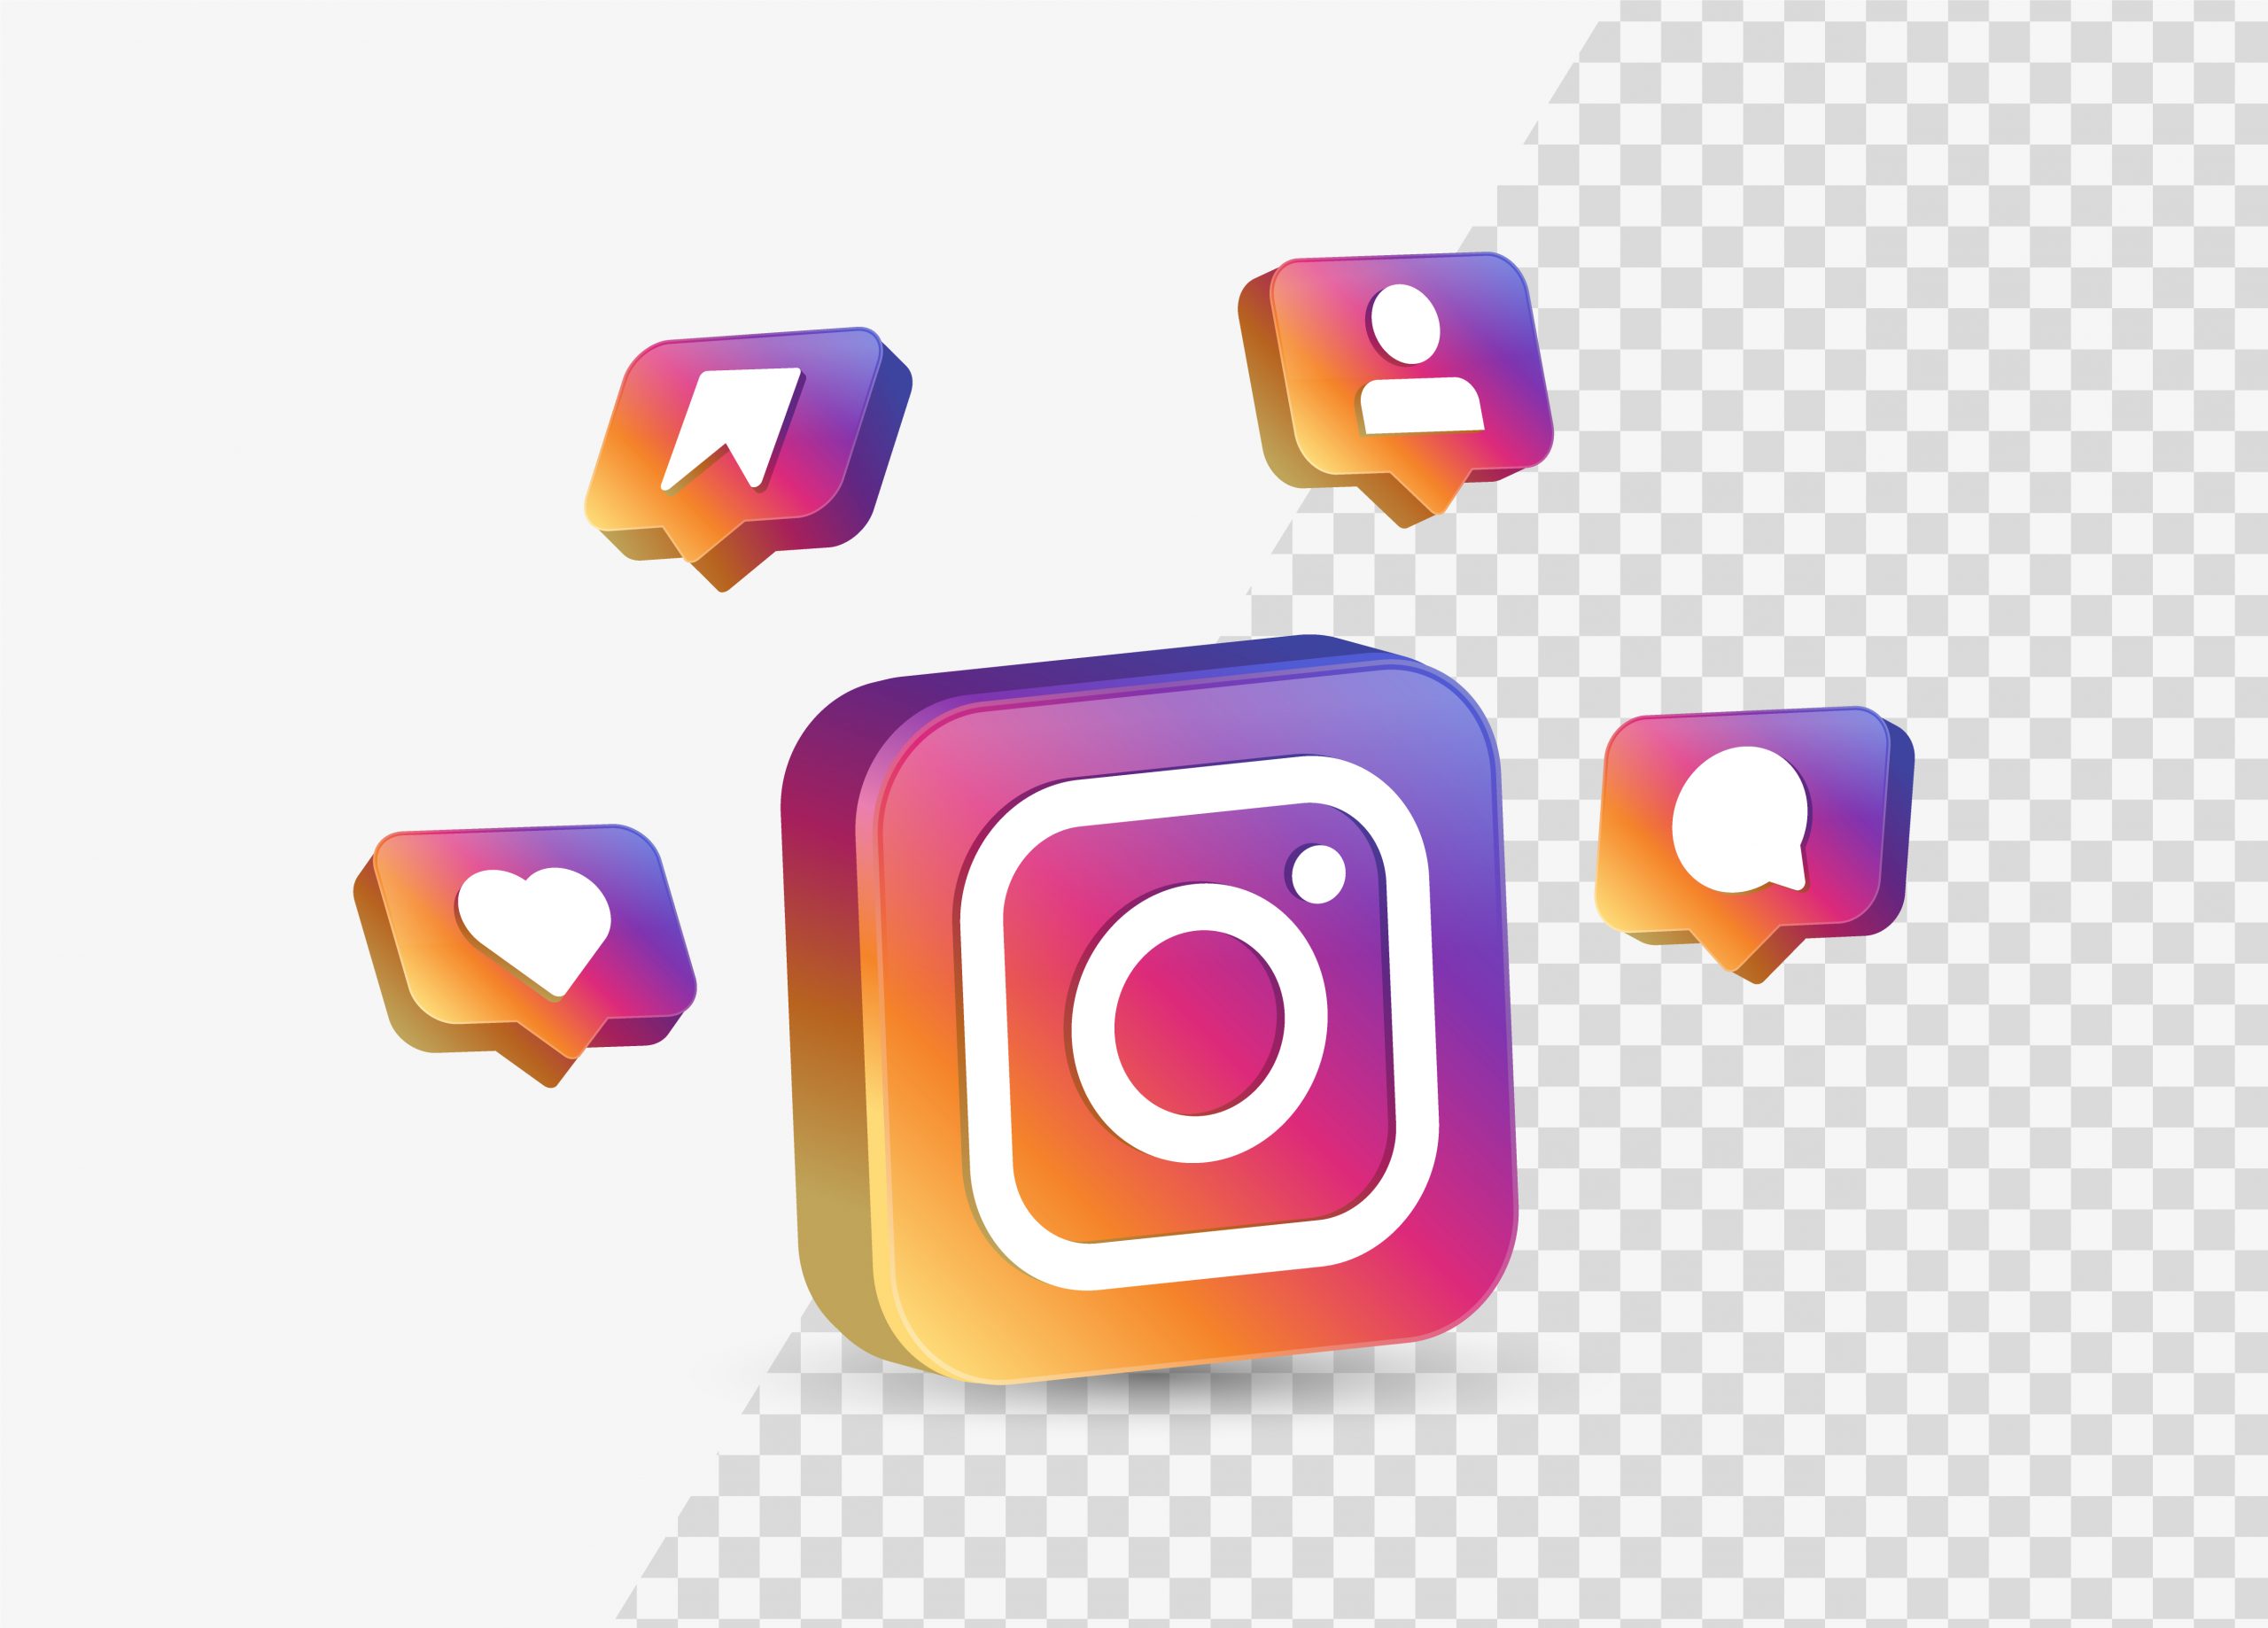 How to mention someone on Instagram?